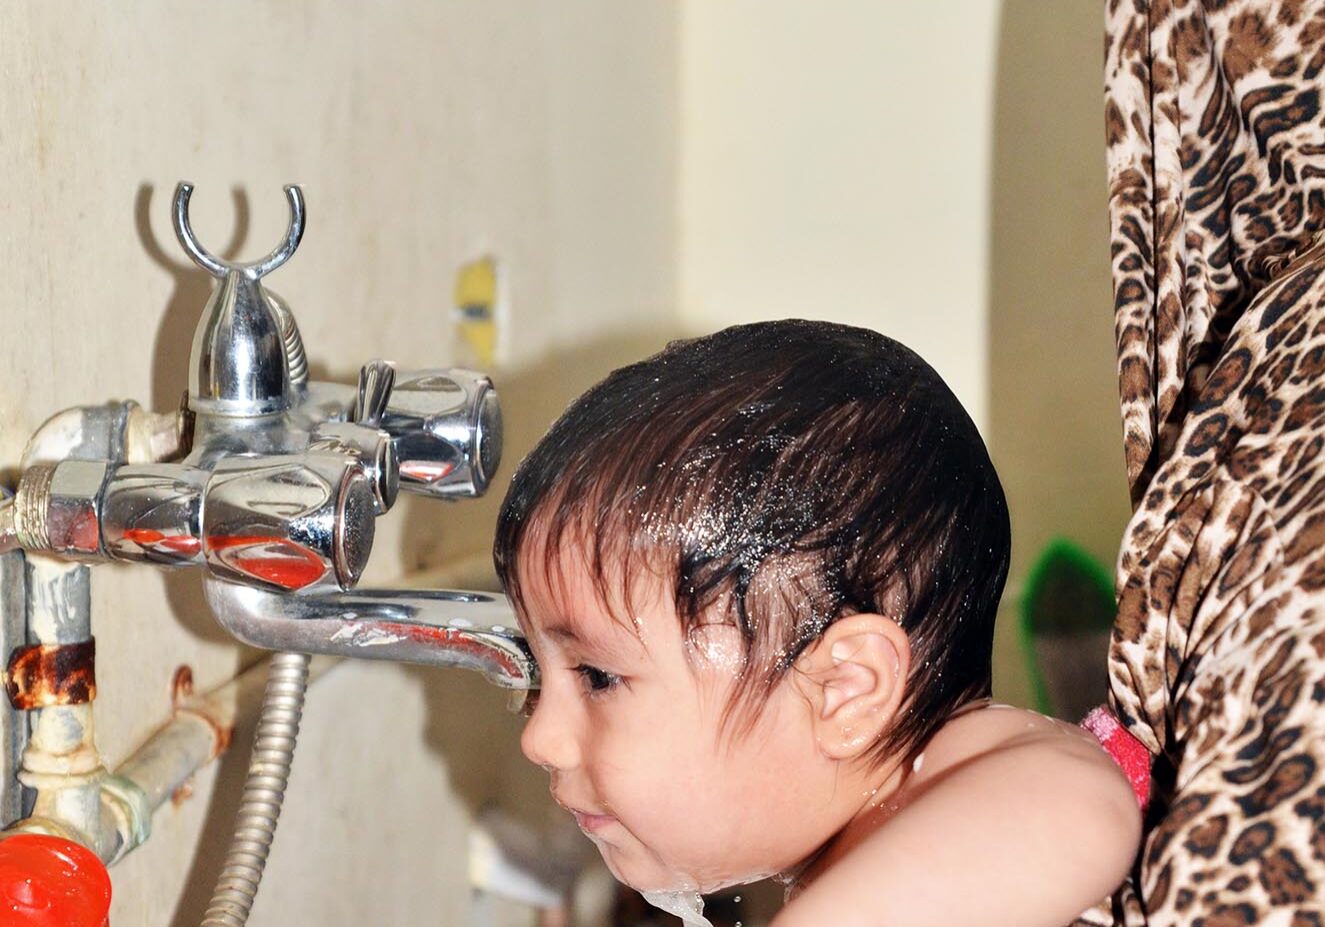 Ibtisam's son bathing under the faucet which was recently connected clean water